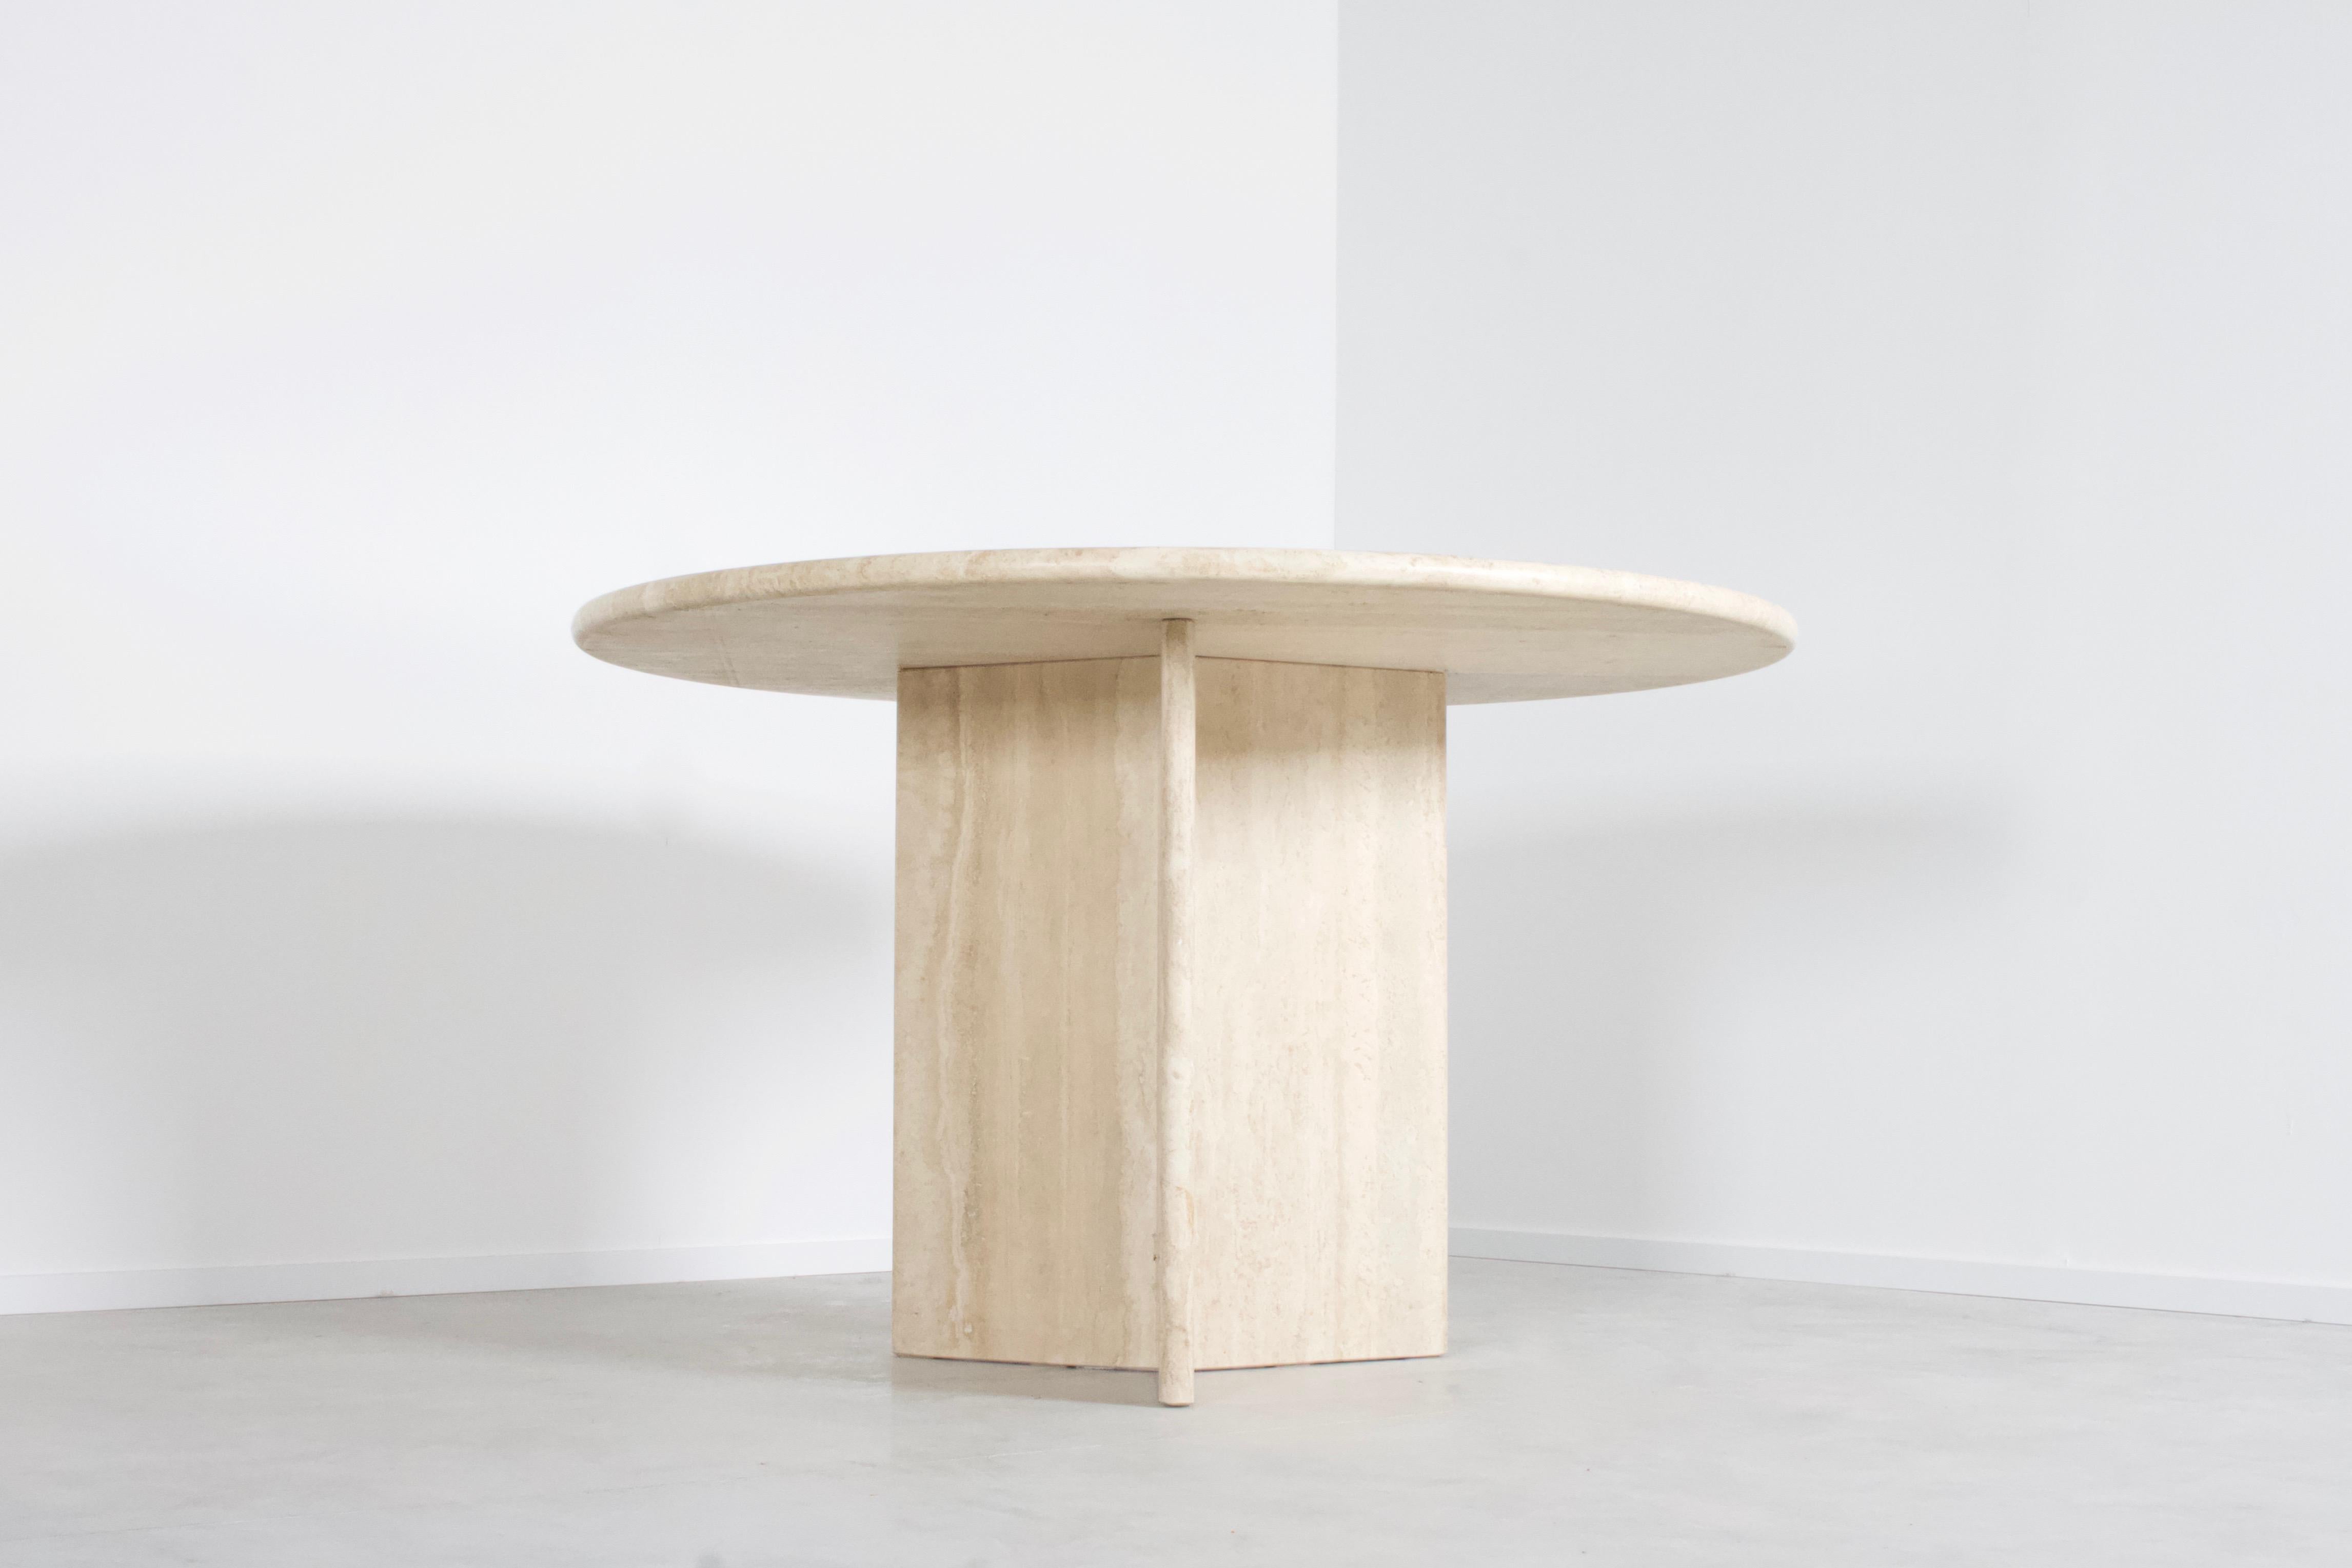 Round travertine dining table in very good condition.

The table has a round travertine top.

The base is formed of three slabs of travertine, which combine into a triangle or star shape.

The travertine surface is absolutely breathtaking and makes